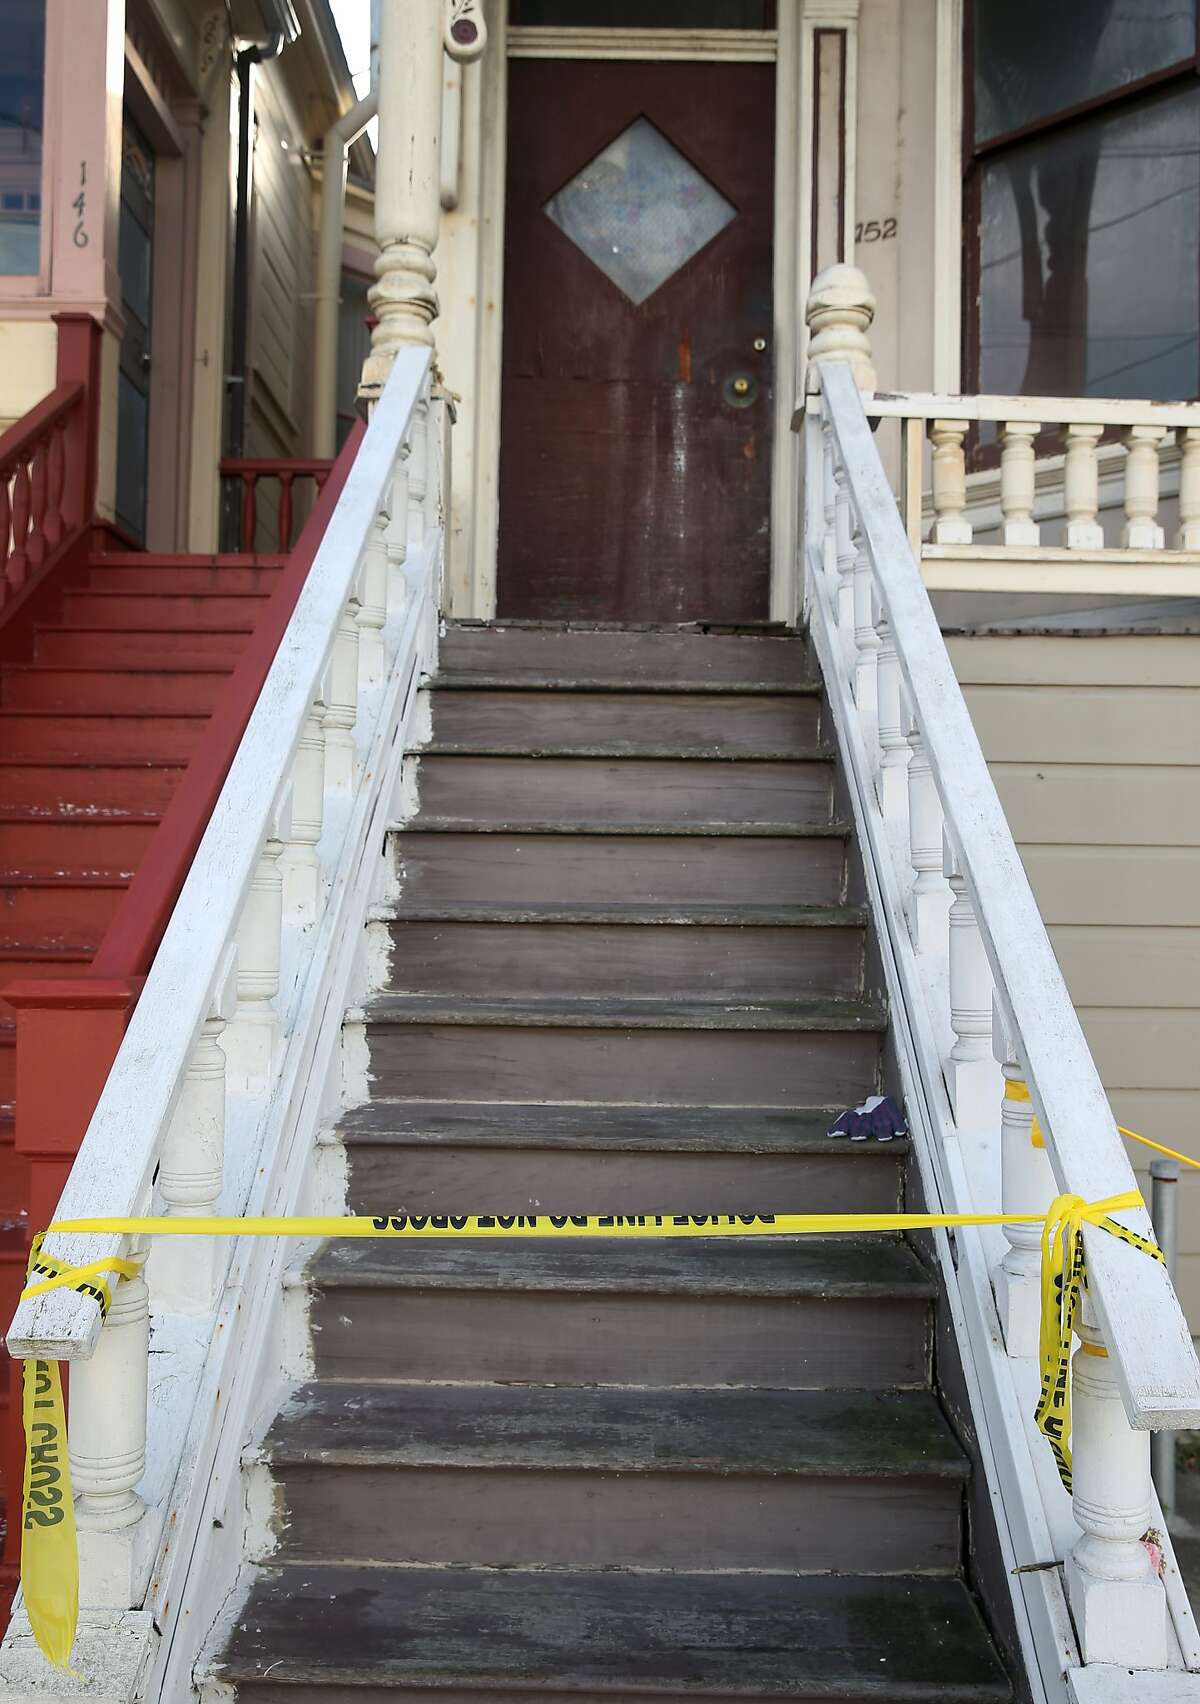 Crime scene tape remains on a stairway leading to a home on Fourth Avenue in San Francisco, Calif. on Wednesday, April 8, 2015, where a mummified body was removed over the weekend.